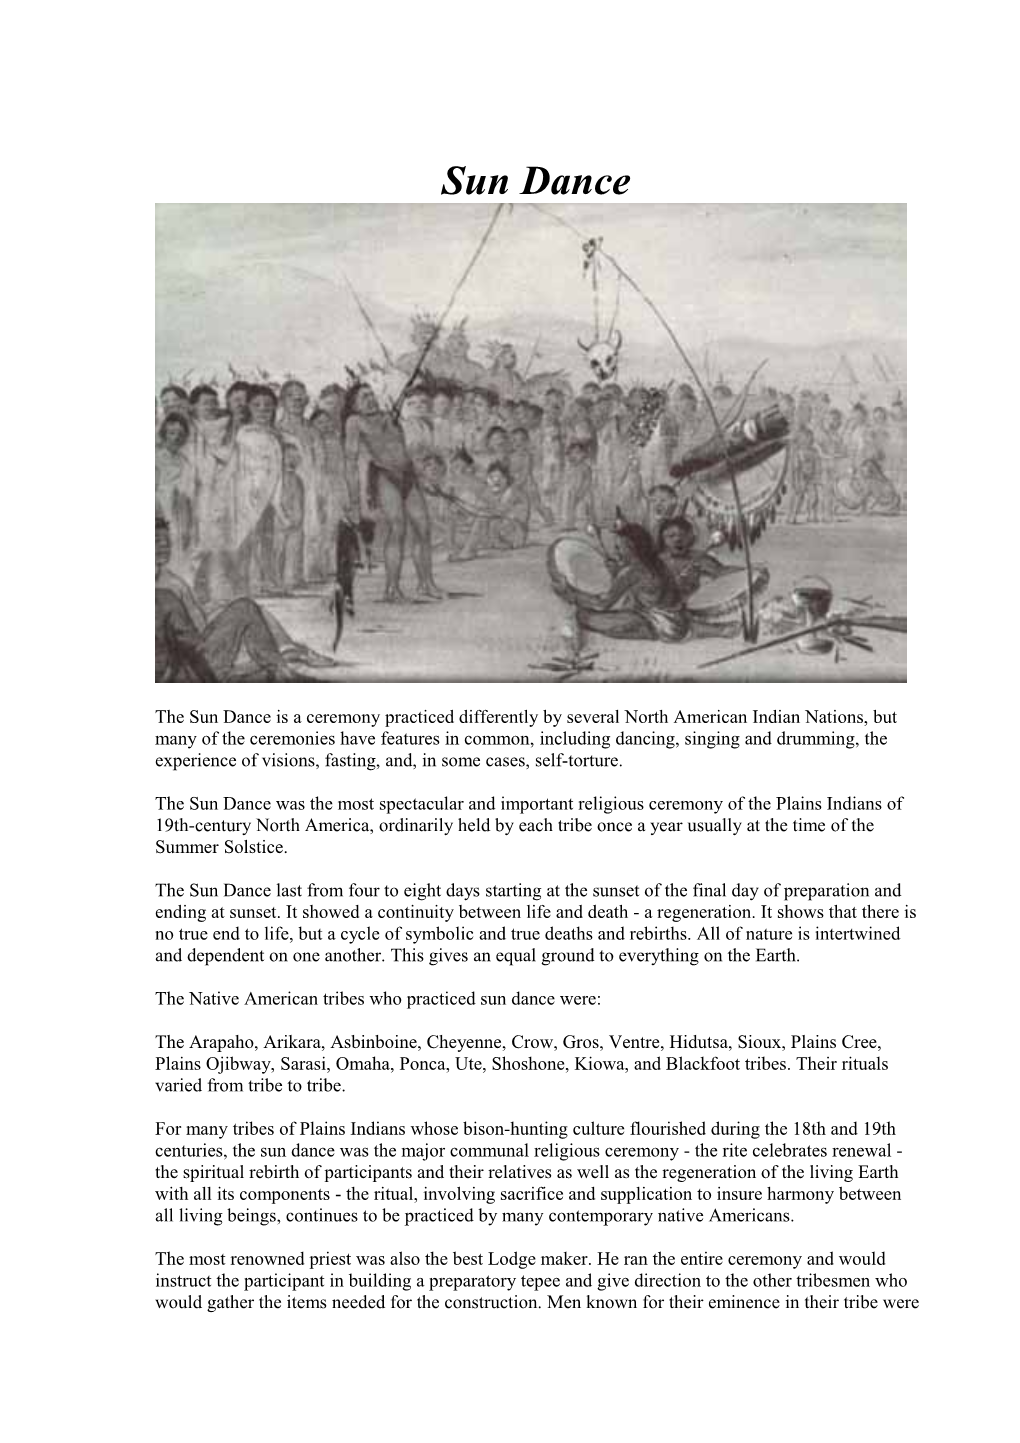 The Native American Tribes Who Practiced Sun Dance Were